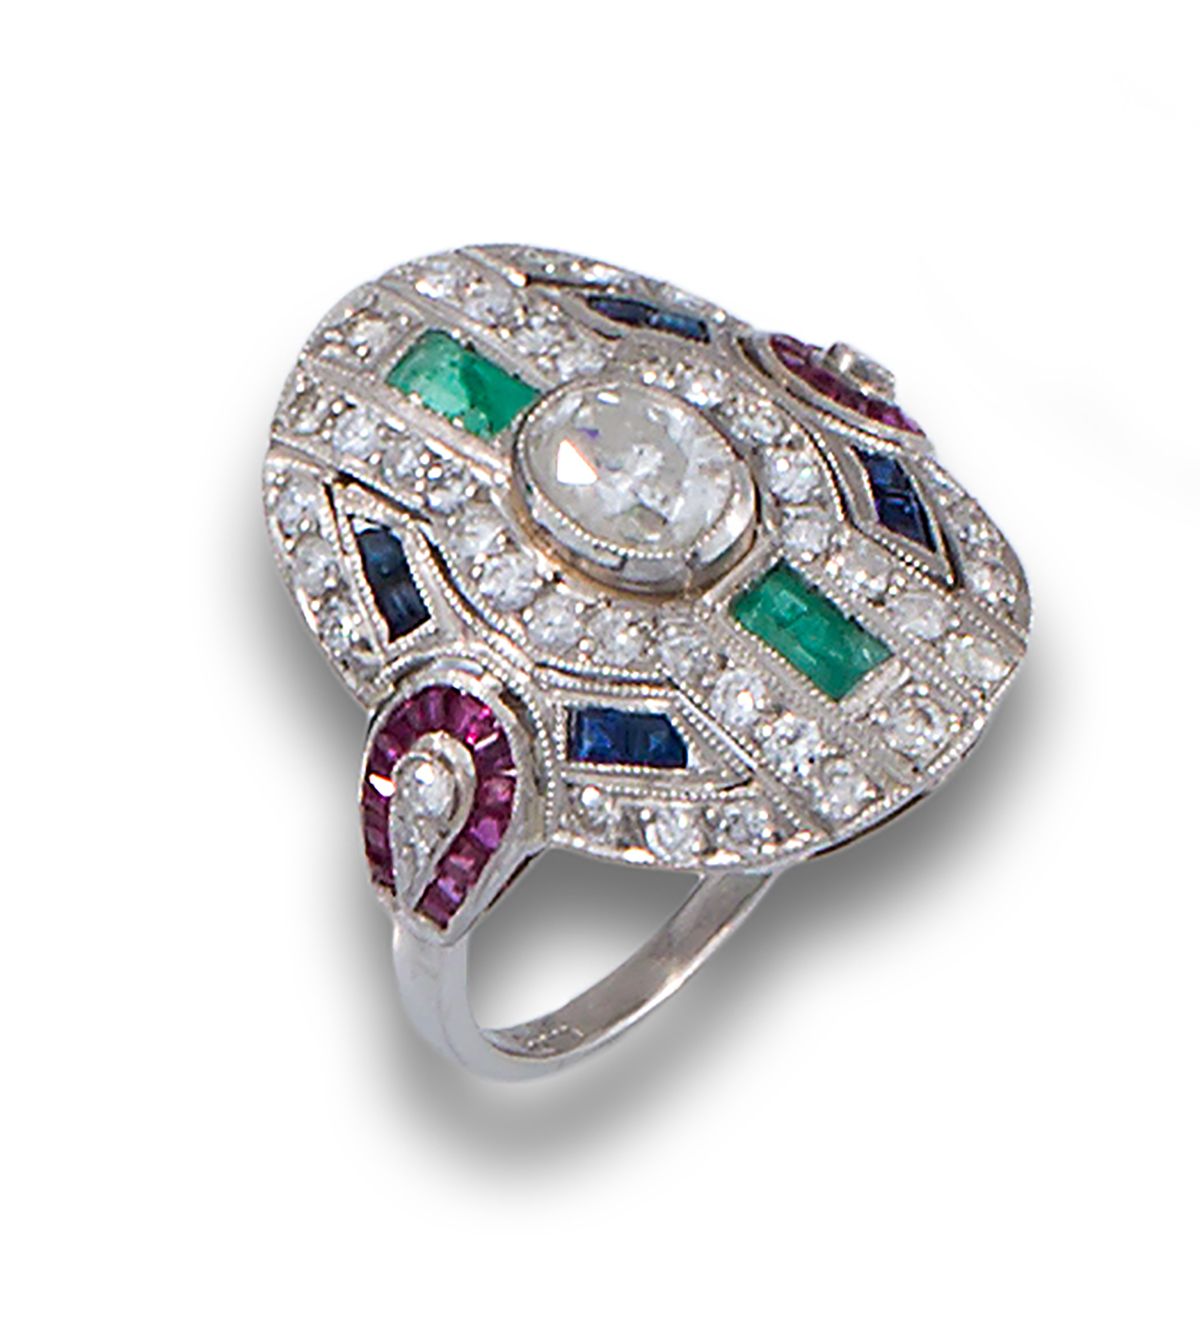 PLATINUM PLATED SHUTTLE RING WITH EMERALD DIAMONDS Art Deco style shuttle ring i&hellip;